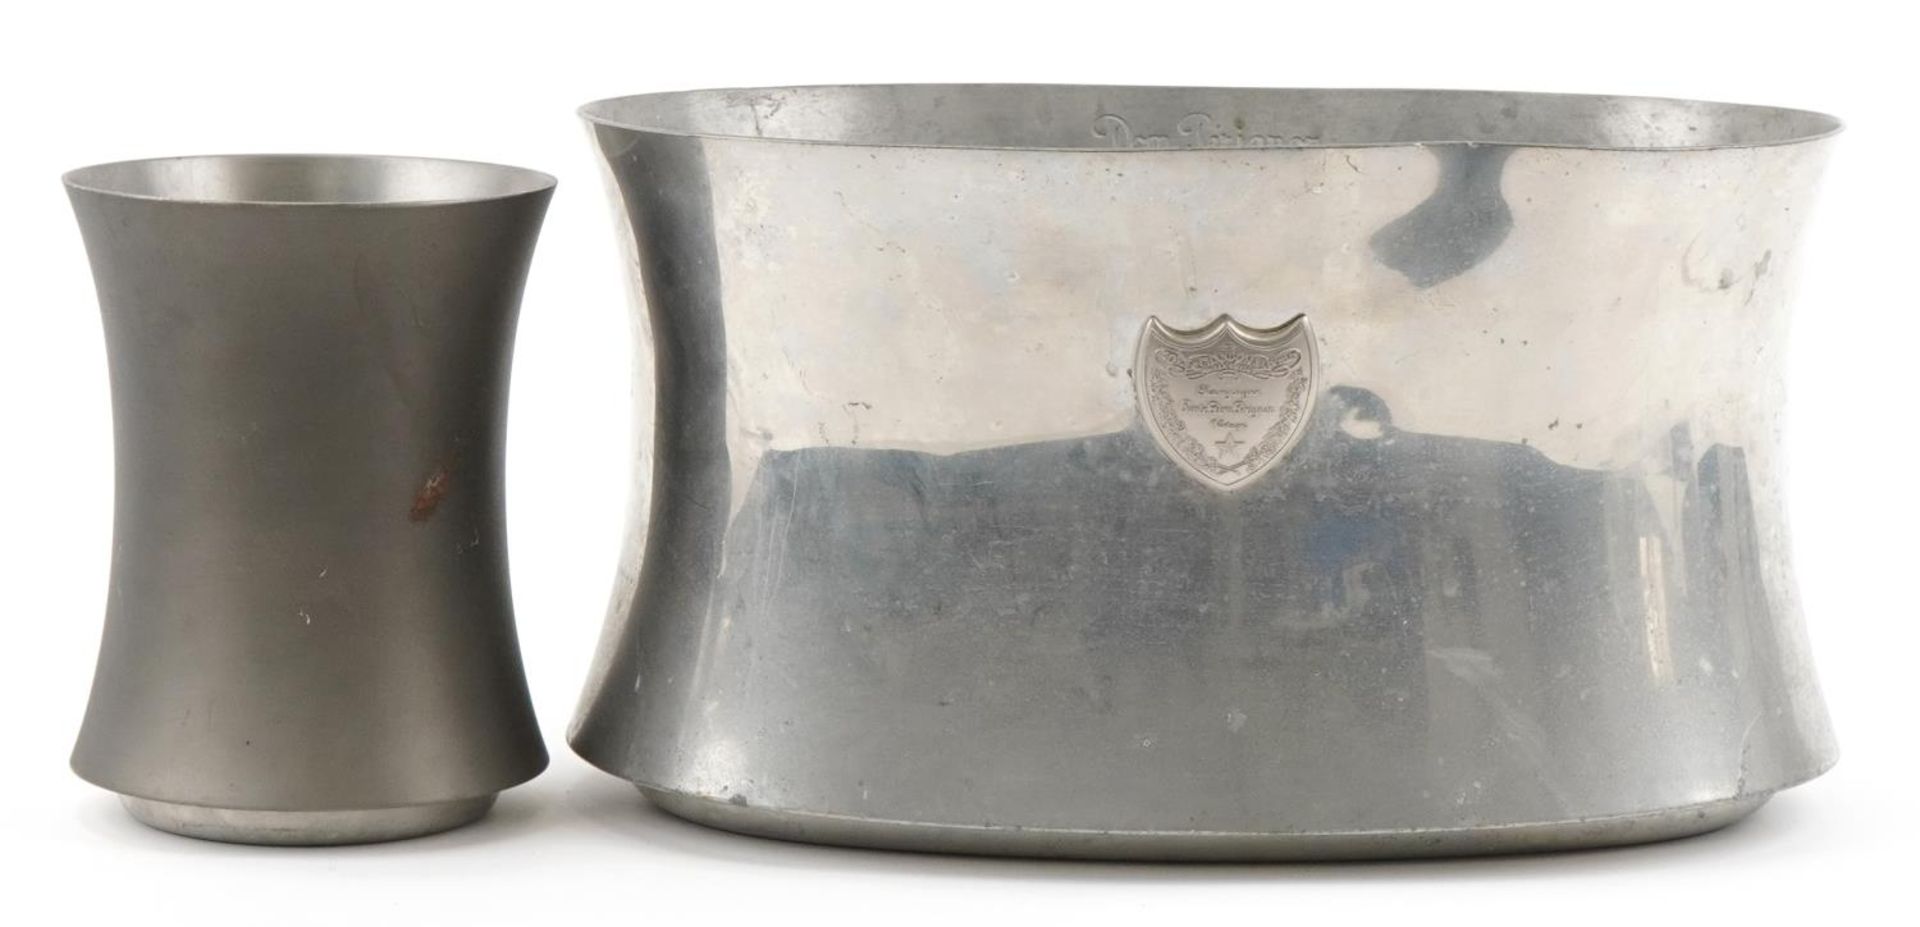 Two vintage French pewter Dom Perignon ice buckets designed by Martin Szekely, the largest 39cm wide - Image 4 of 5